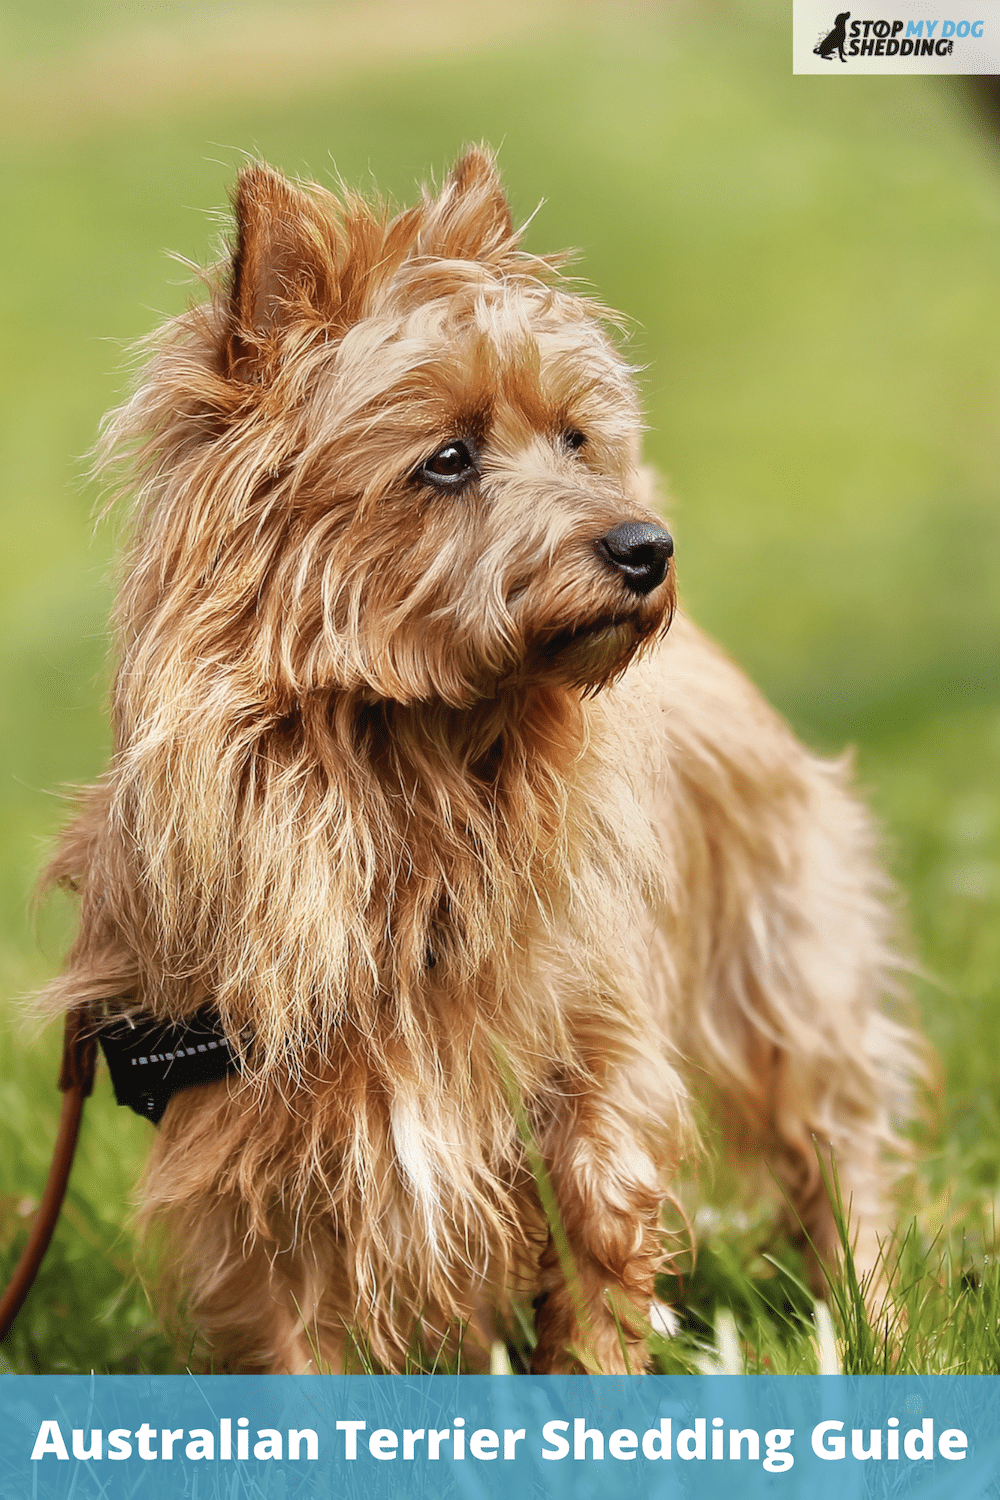 Do Australian Terriers Shed? (What You Need to Know)